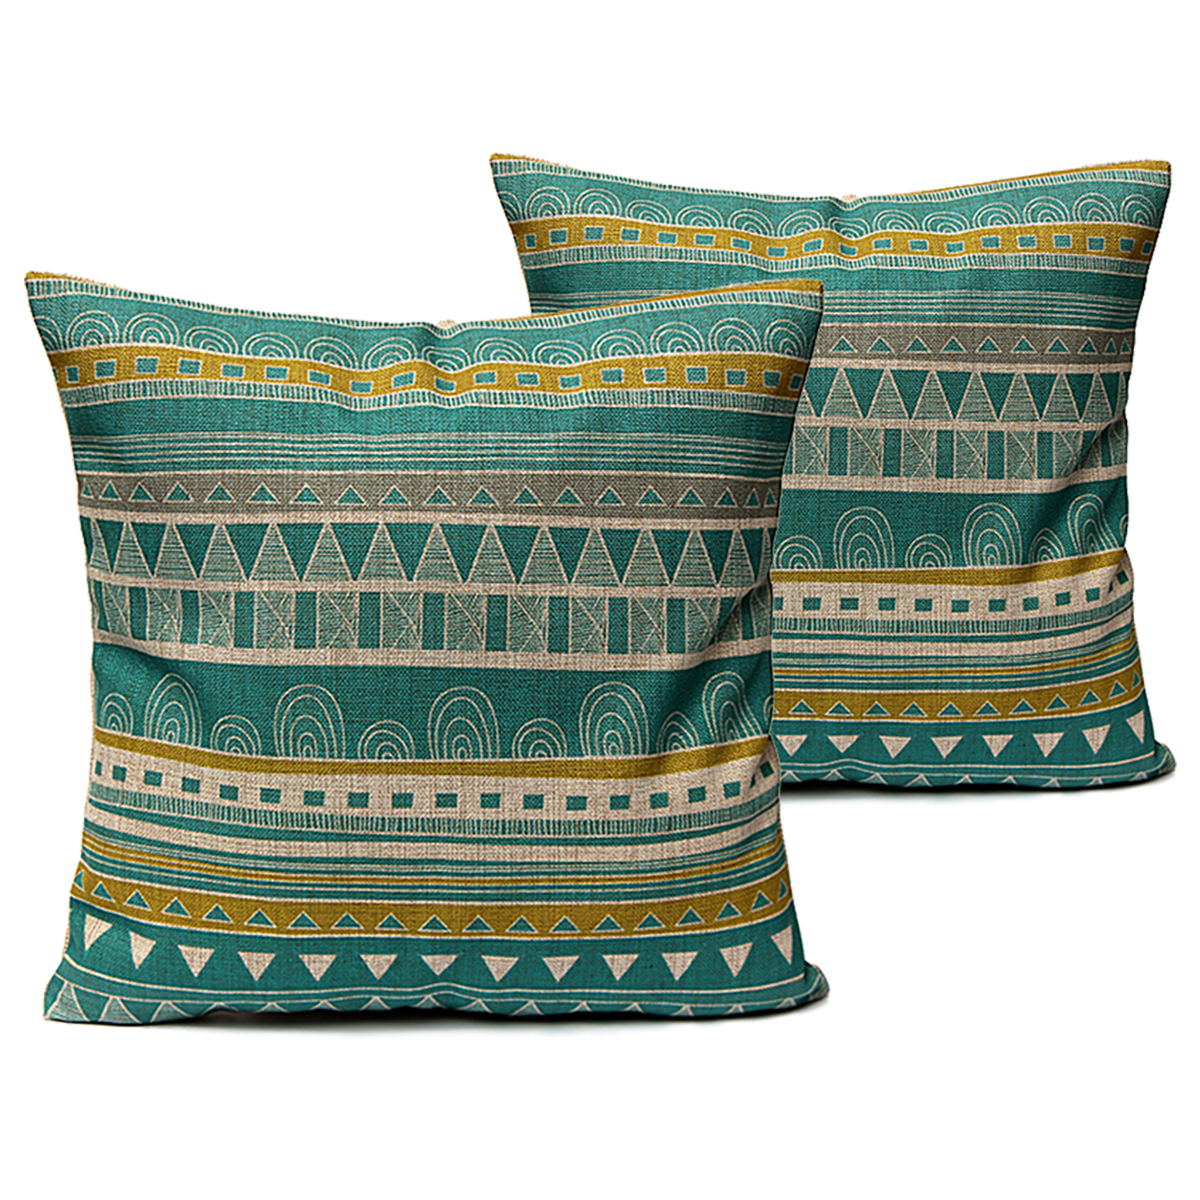 Minimalist-Style-Pillow-Case-Home-Linen-Cushion-Cover-Fashion-Colorful-Geometric-Patterns-951098-1